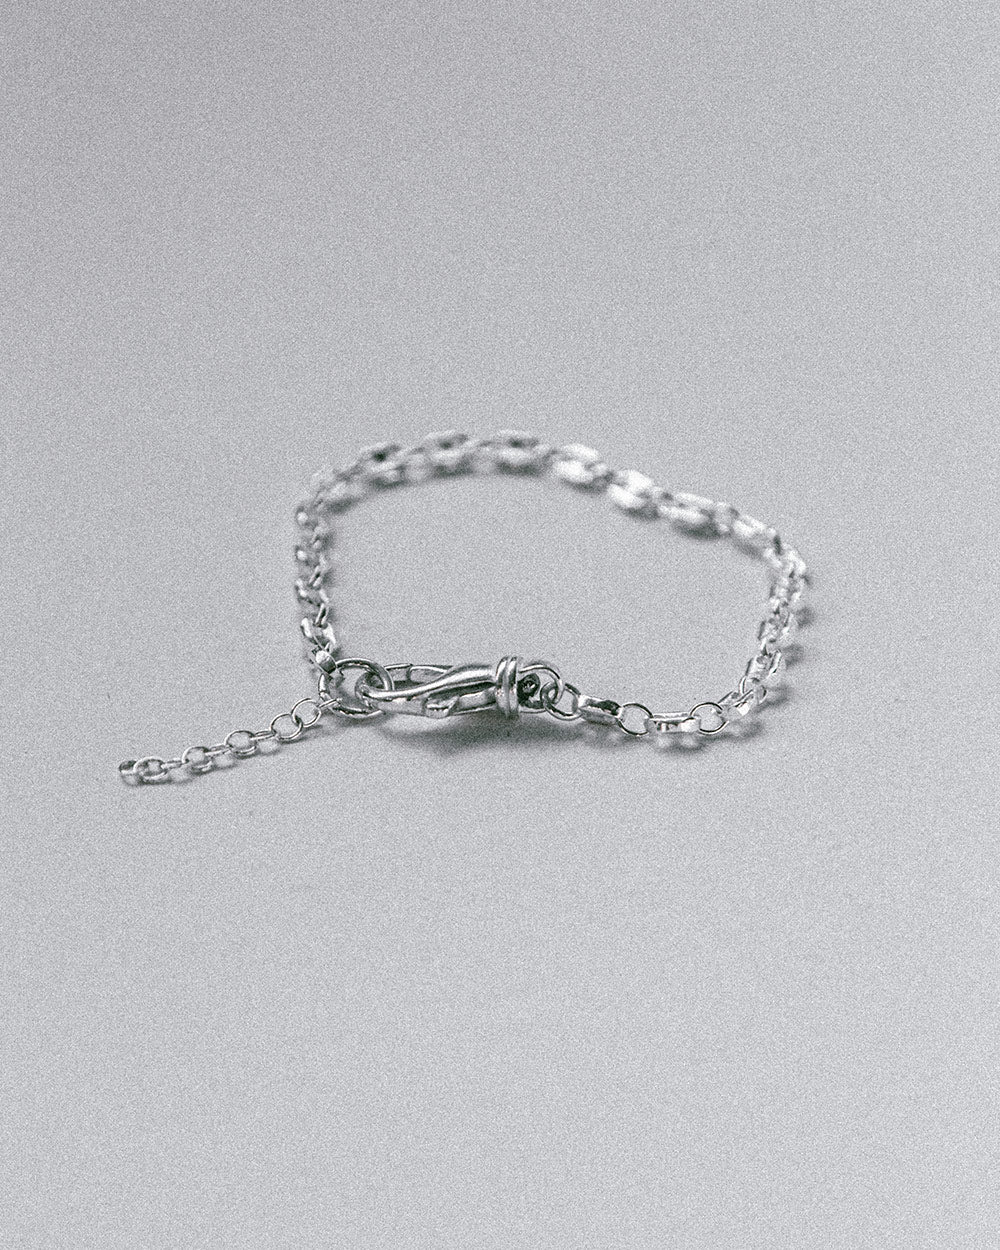 sterling silver soft and sticky bracelet woman owned small business